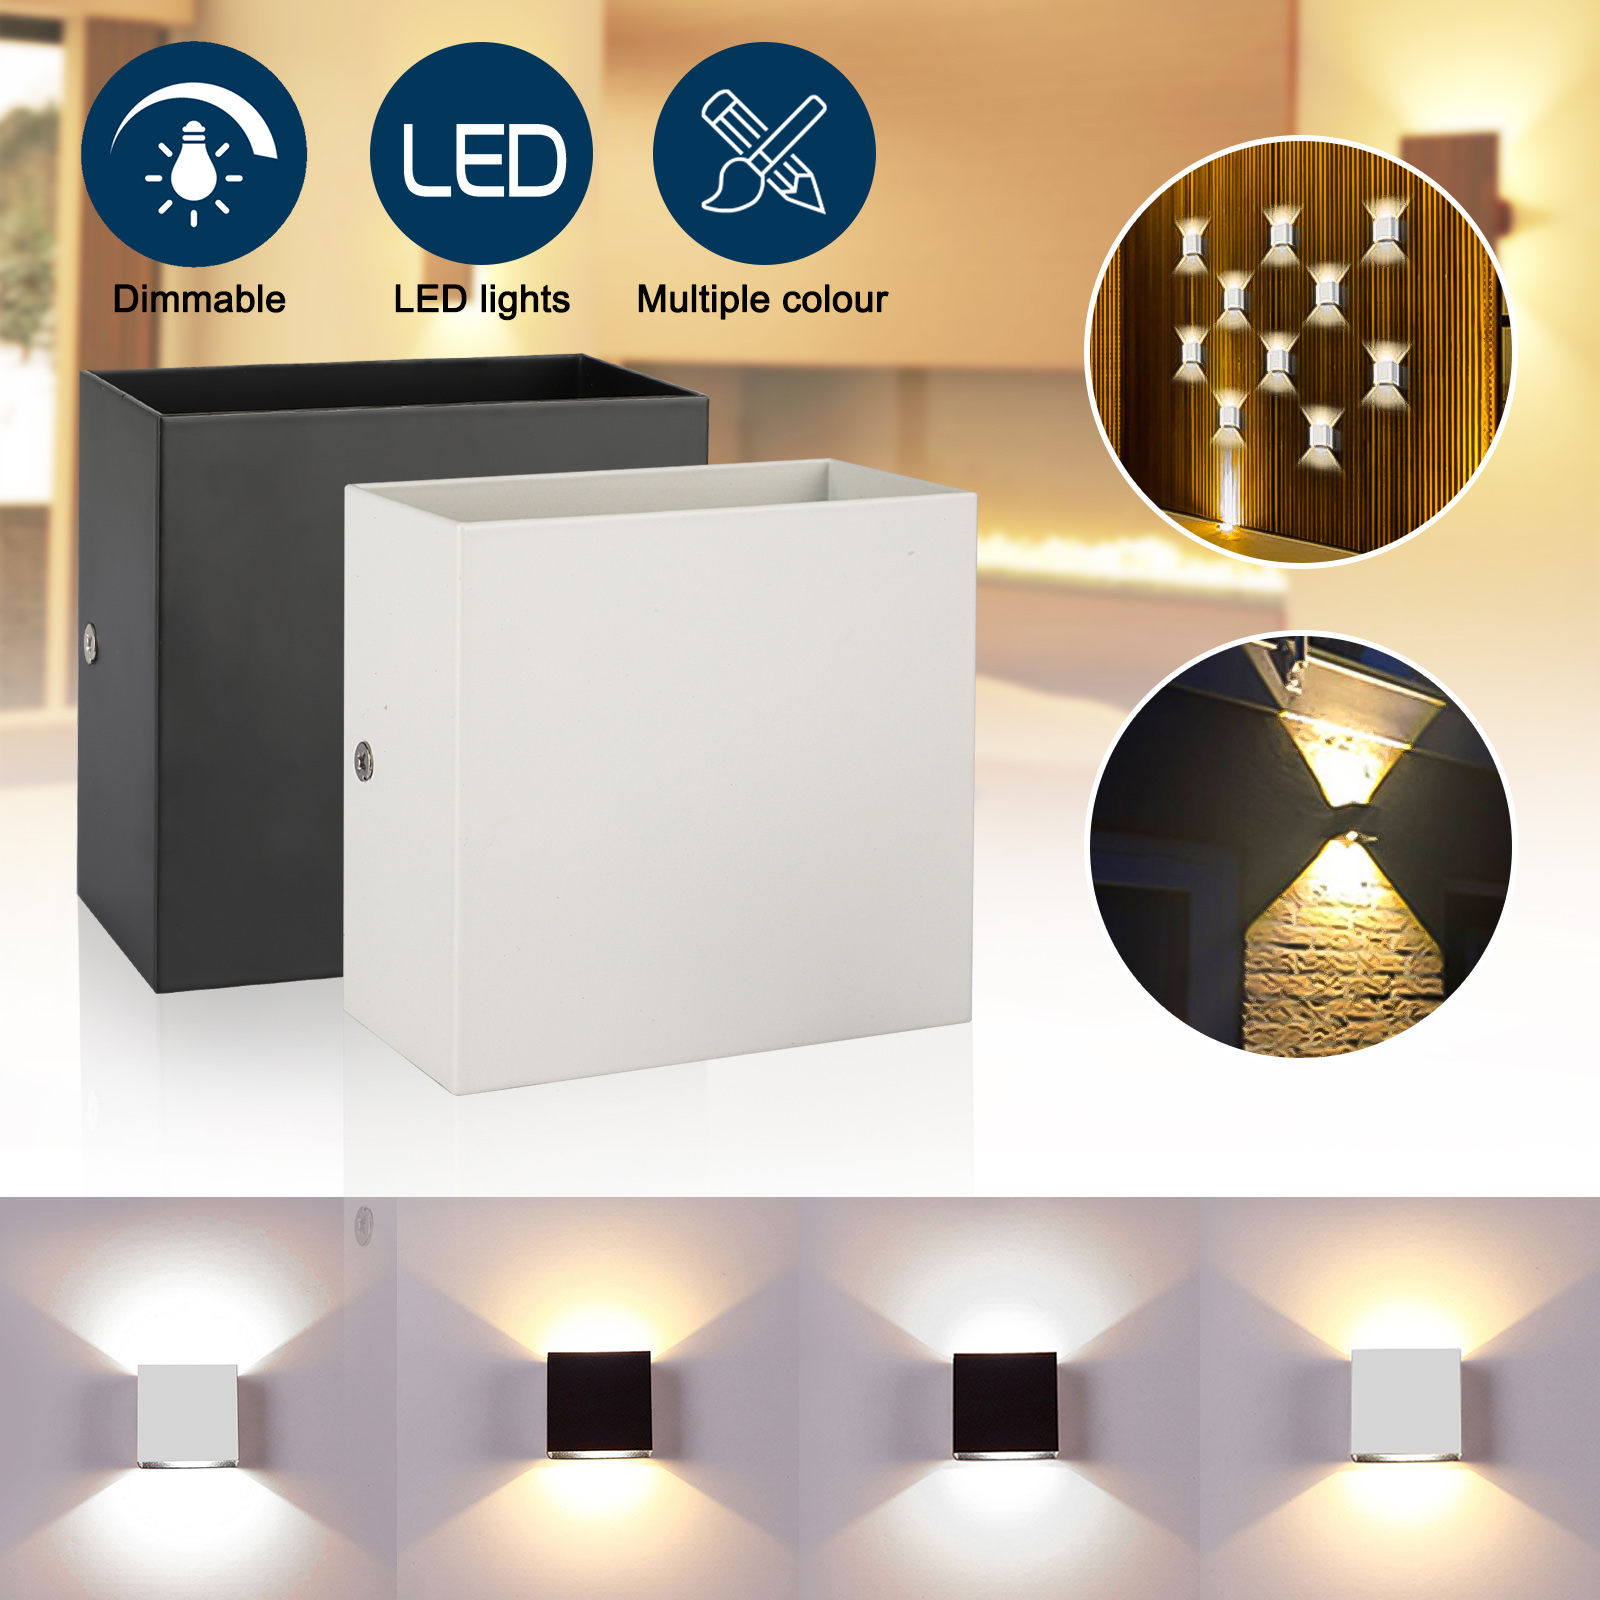 Modern COB LED Wall Light Up Down Cube Indoor Outdoor Sconce Lighting Lamp Home 